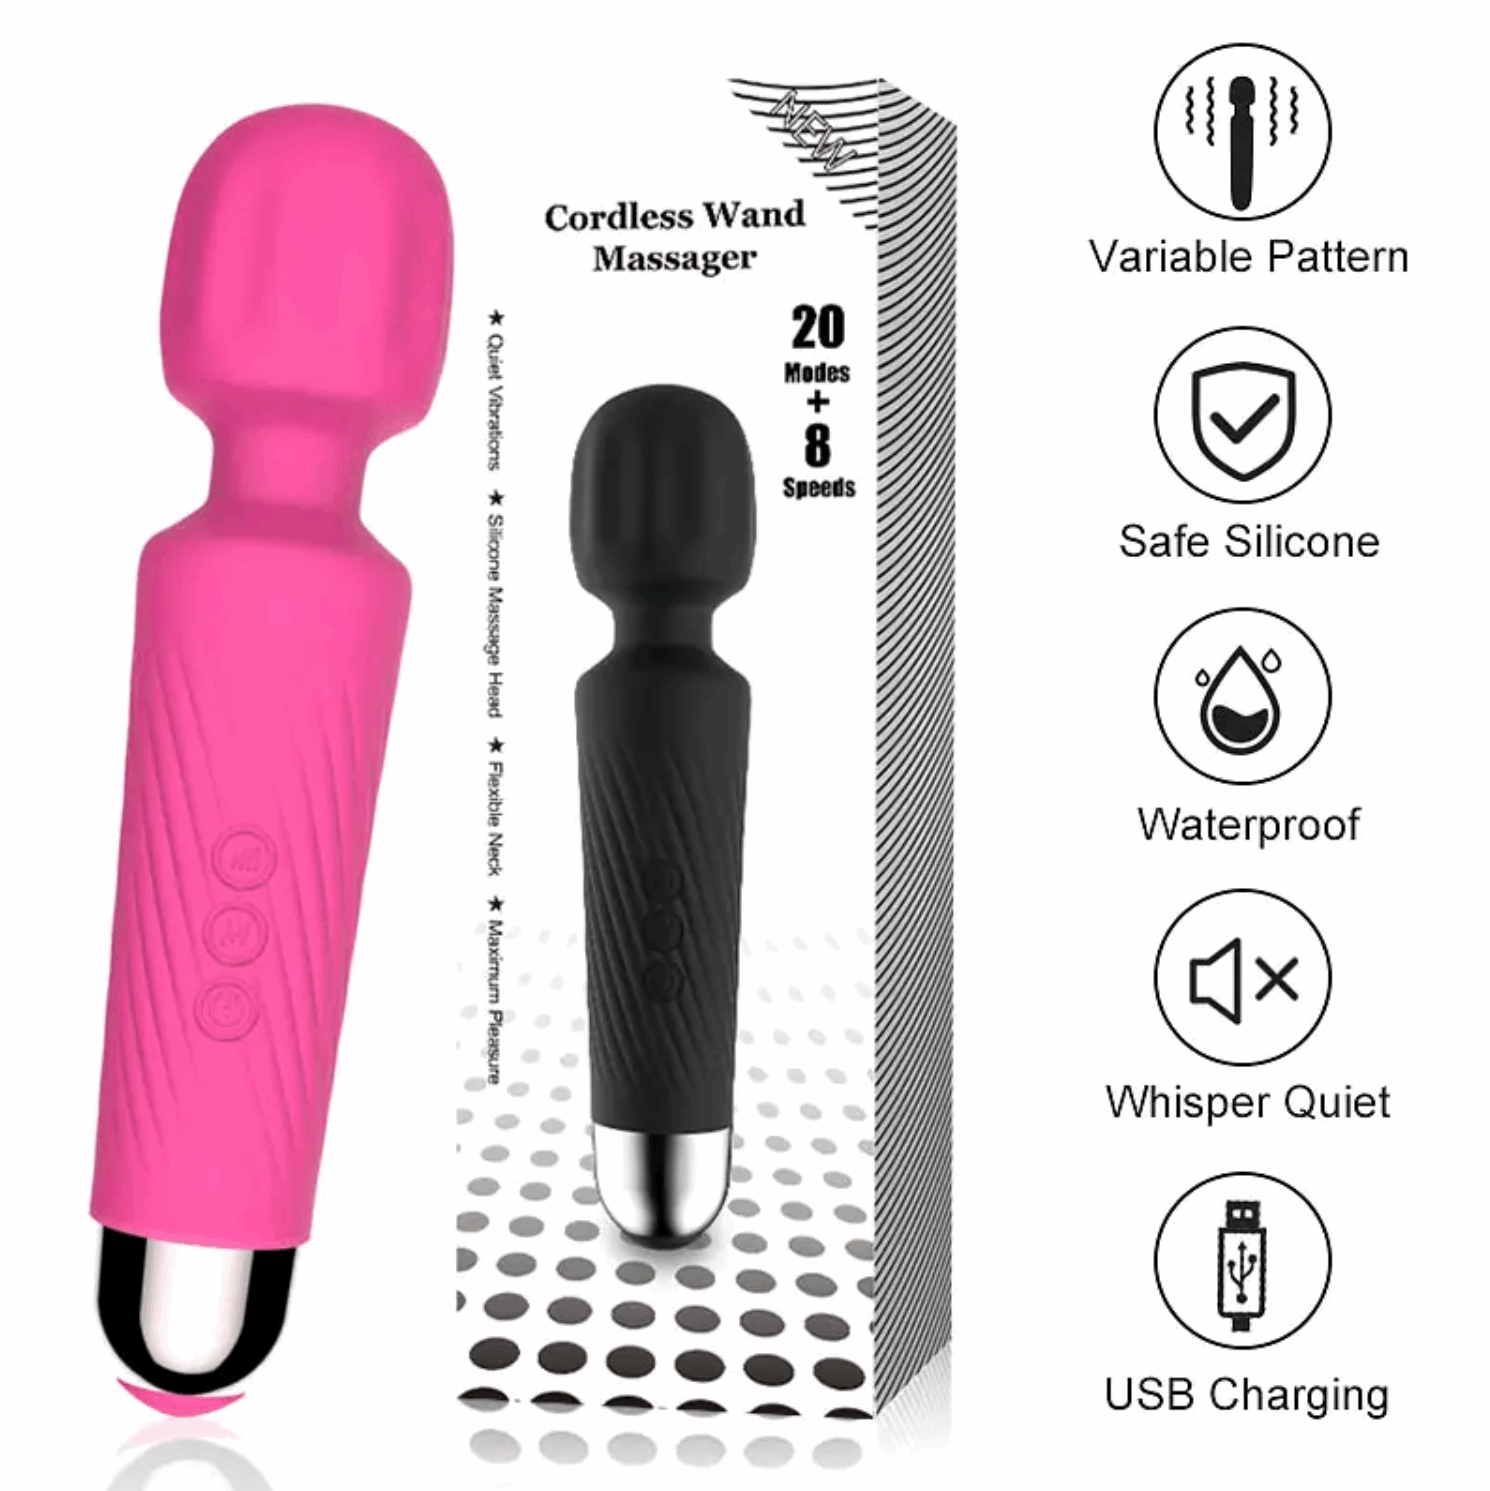 SpiriTouch Portable Handheld Personal Massager for Women Stress Relief with Vibration Waterproof - SpiriTouchMassager-U.S.